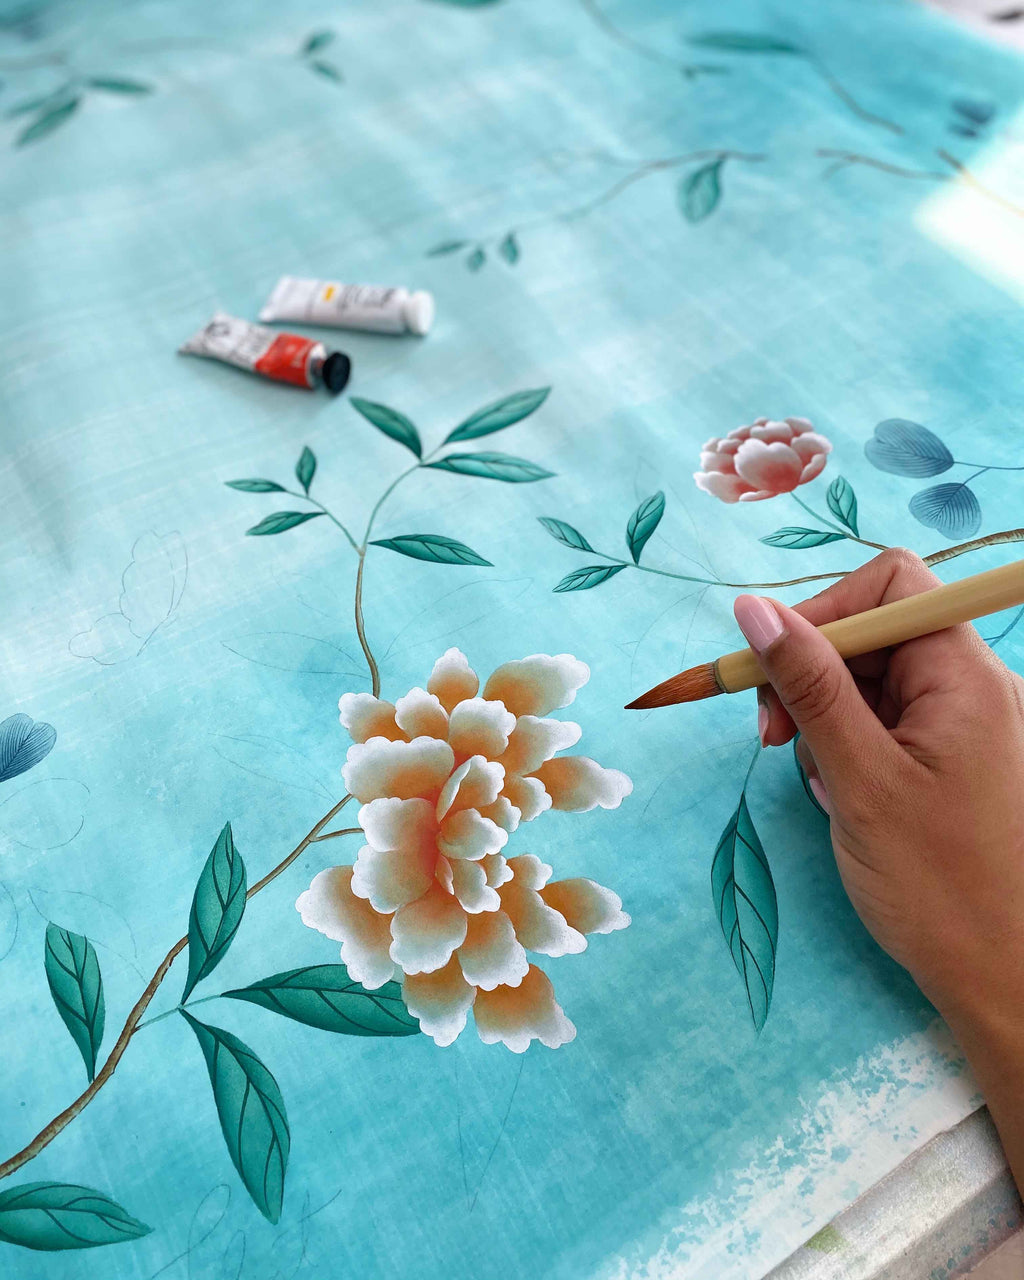 A close up of Diane Hill holding a Chinese paintbrush as she creates a silk scarf design in collaboration with Sarah Flint